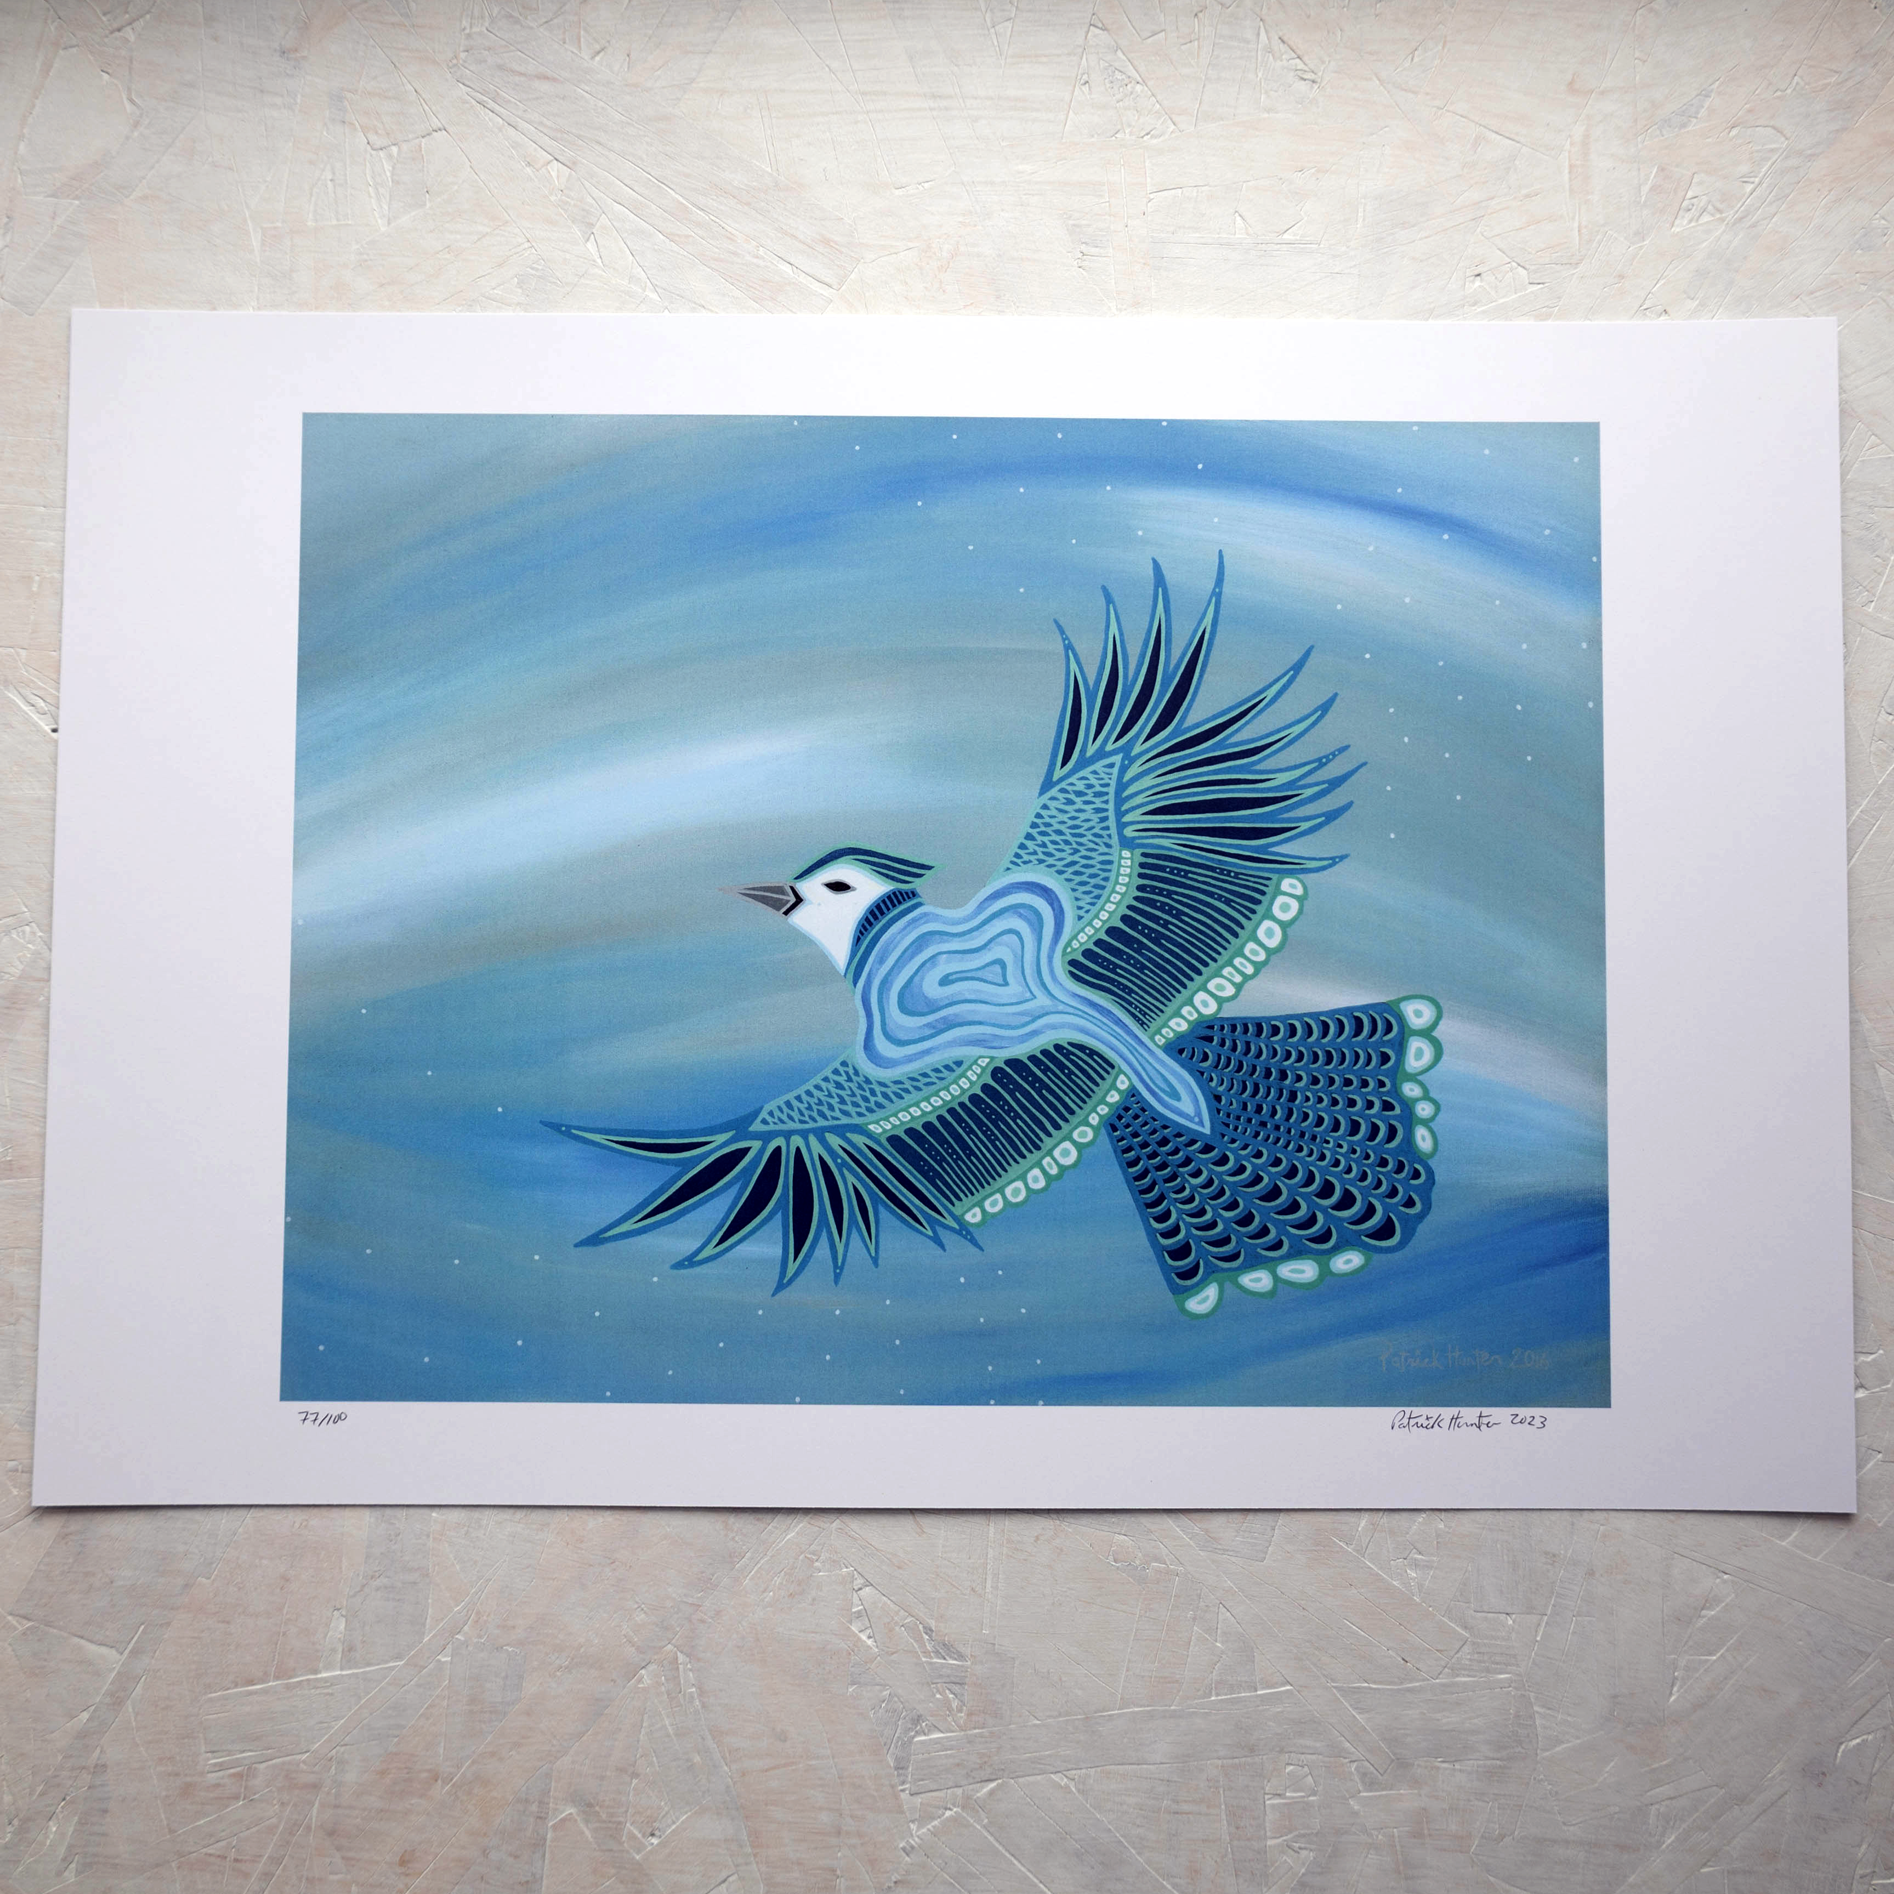 Print of Patrick Hunter's painting of a blue jay in flight in woodland art style.